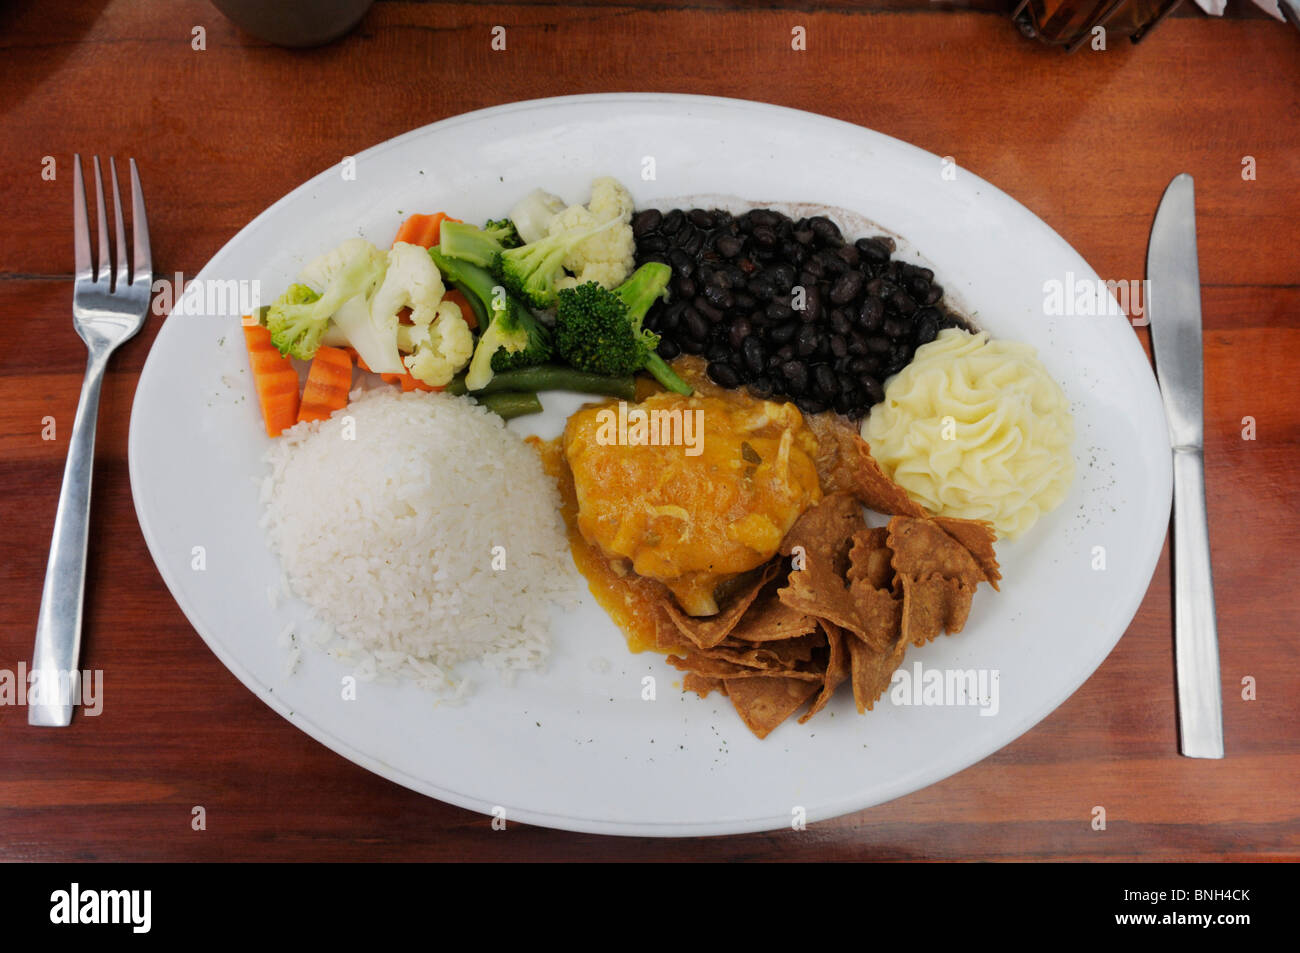 Typical Costa Rican meal, comida tipica.  Meat (chicken), vegetable, rice and beans (gallo pinto).  Restaurant in La Fortuna Stock Photo